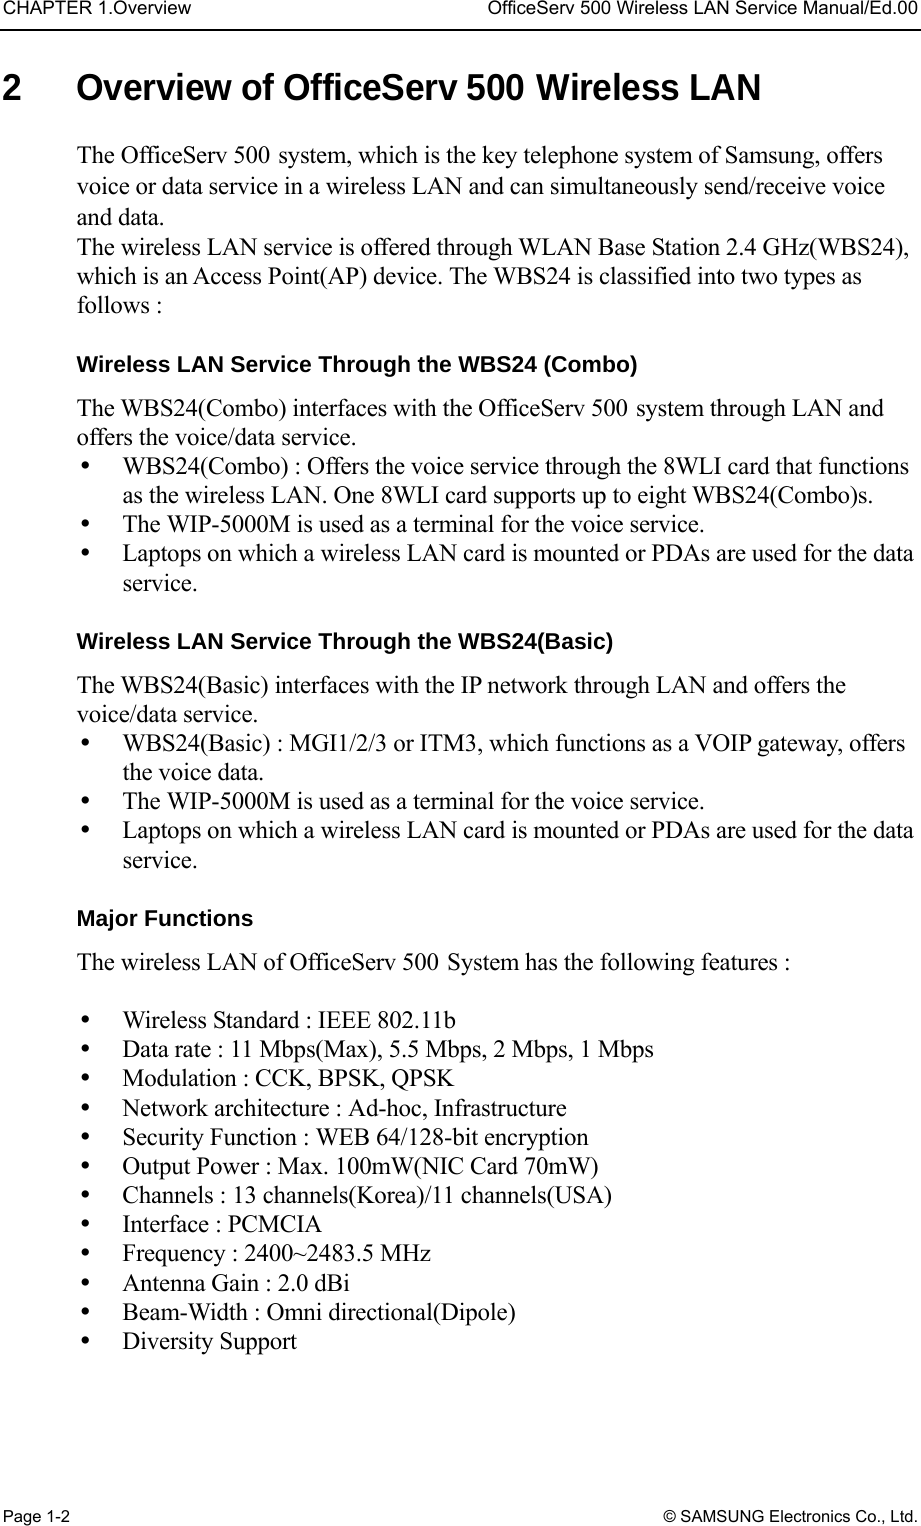 CHAPTER 1.Overview  OfficeServ 500 Wireless LAN Service Manual/Ed.00 Page 1-2 © SAMSUNG Electronics Co., Ltd. 2  Overview of OfficeServ 500 Wireless LAN The OfficeServ 500 system, which is the key telephone system of Samsung, offers voice or data service in a wireless LAN and can simultaneously send/receive voice and data.   The wireless LAN service is offered through WLAN Base Station 2.4 GHz(WBS24), which is an Access Point(AP) device. The WBS24 is classified into two types as follows :    Wireless LAN Service Through the WBS24 (Combo) The WBS24(Combo) interfaces with the OfficeServ 500 system through LAN and offers the voice/data service.   WBS24(Combo) : Offers the voice service through the 8WLI card that functions as the wireless LAN. One 8WLI card supports up to eight WBS24(Combo)s.     The WIP-5000M is used as a terminal for the voice service.     Laptops on which a wireless LAN card is mounted or PDAs are used for the data service.  Wireless LAN Service Through the WBS24(Basic) The WBS24(Basic) interfaces with the IP network through LAN and offers the voice/data service.     WBS24(Basic) : MGI1/2/3 or ITM3, which functions as a VOIP gateway, offers the voice data.     The WIP-5000M is used as a terminal for the voice service.   Laptops on which a wireless LAN card is mounted or PDAs are used for the data service.  Major Functions   The wireless LAN of OfficeServ 500 System has the following features :    Wireless Standard : IEEE 802.11b   Data rate : 11 Mbps(Max), 5.5 Mbps, 2 Mbps, 1 Mbps   Modulation : CCK, BPSK, QPSK   Network architecture : Ad-hoc, Infrastructure   Security Function : WEB 64/128-bit encryption     Output Power : Max. 100mW(NIC Card 70mW)   Channels : 13 channels(Korea)/11 channels(USA)   Interface : PCMCIA   Frequency : 2400~2483.5 MHz   Antenna Gain : 2.0 dBi   Beam-Width : Omni directional(Dipole)   Diversity Support 